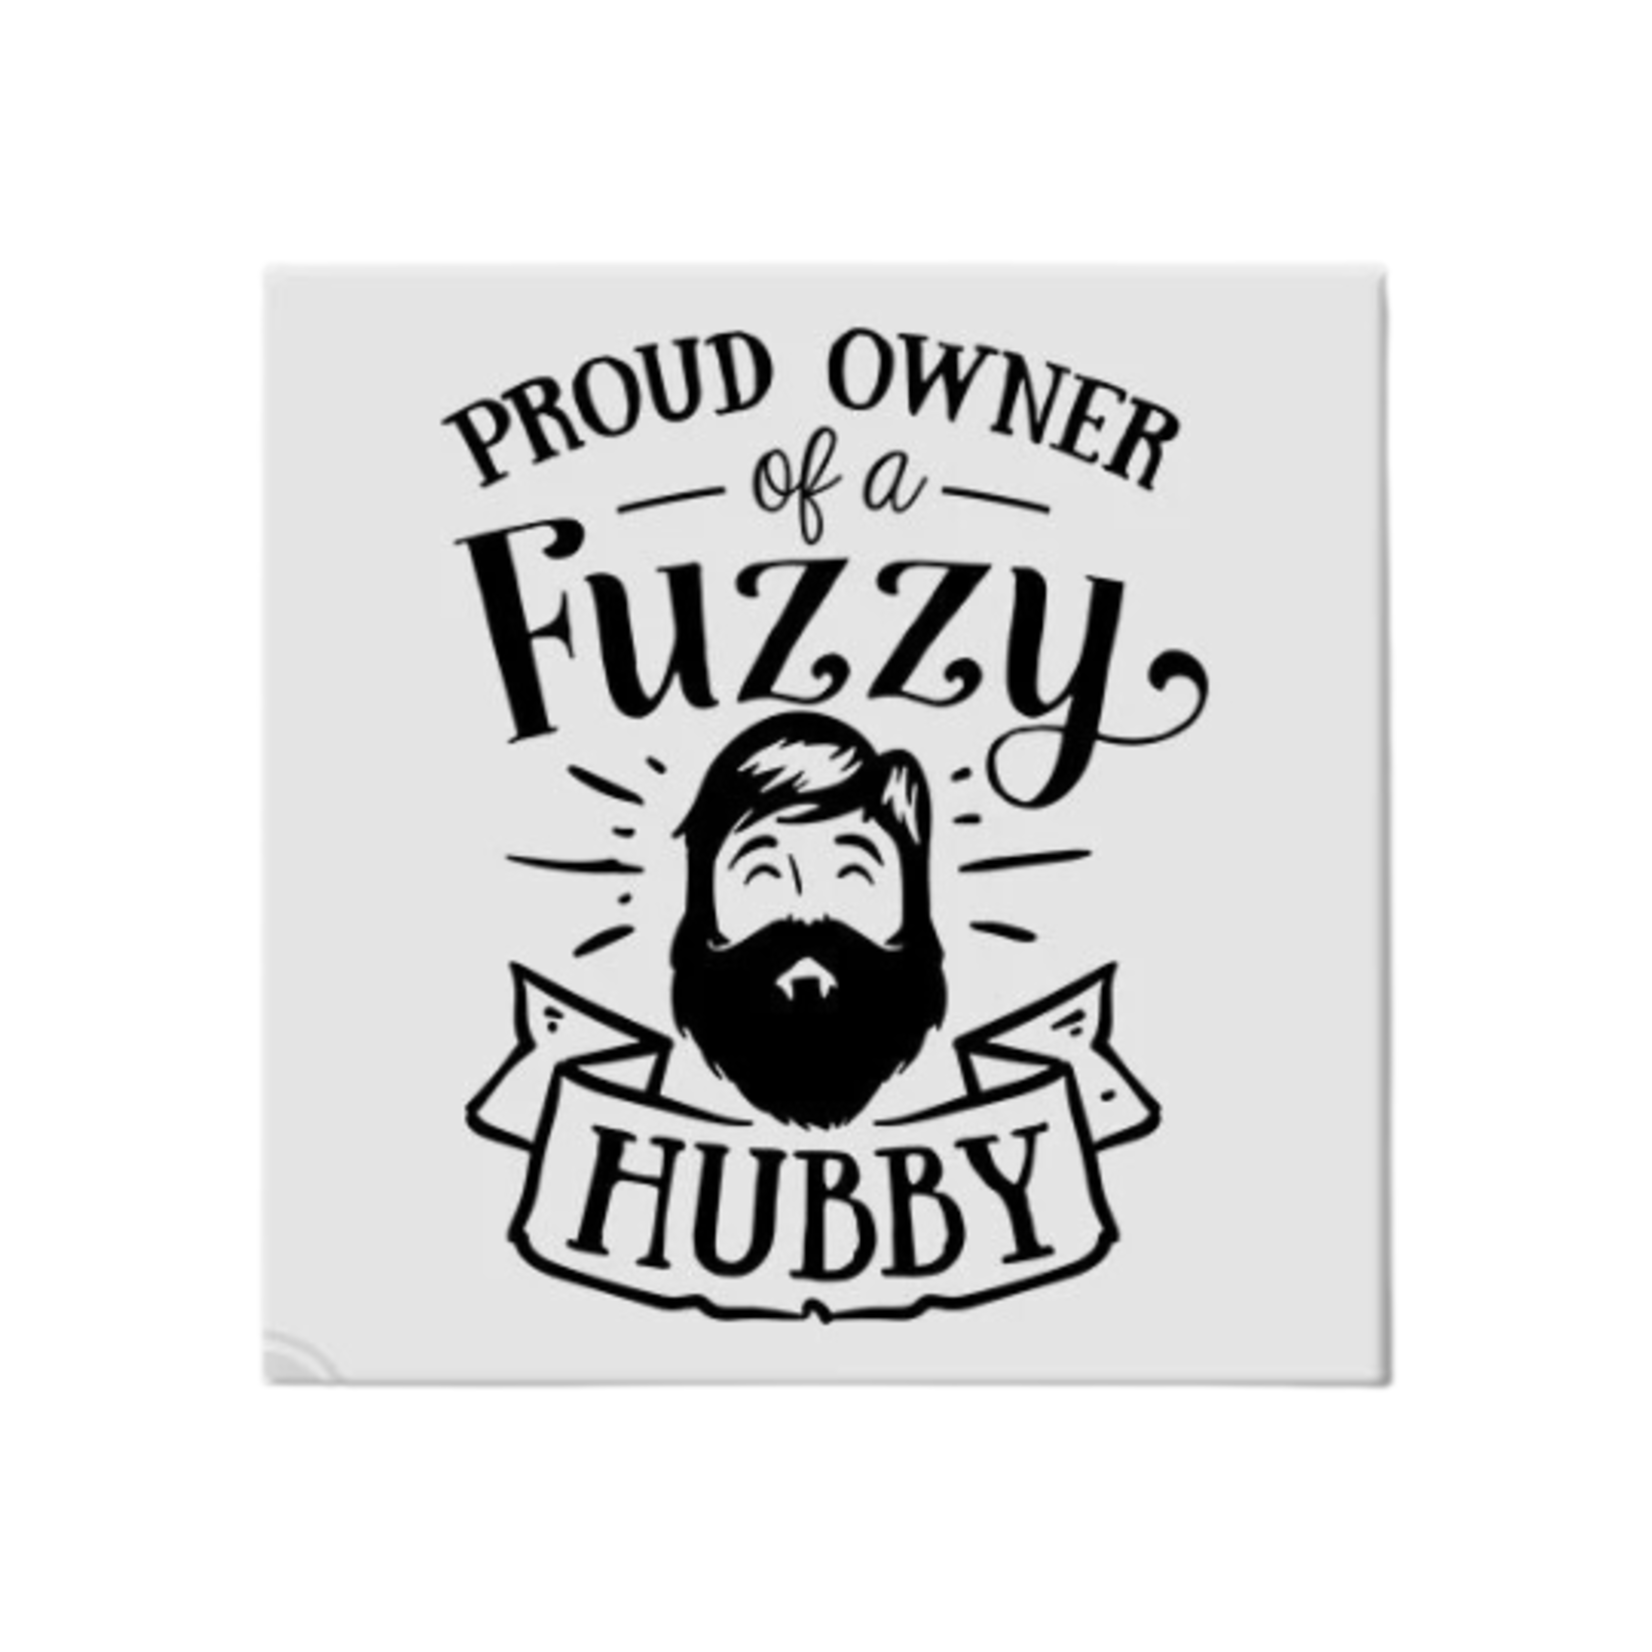 Proud Owner of a Fuzzy Hubby - Magnet